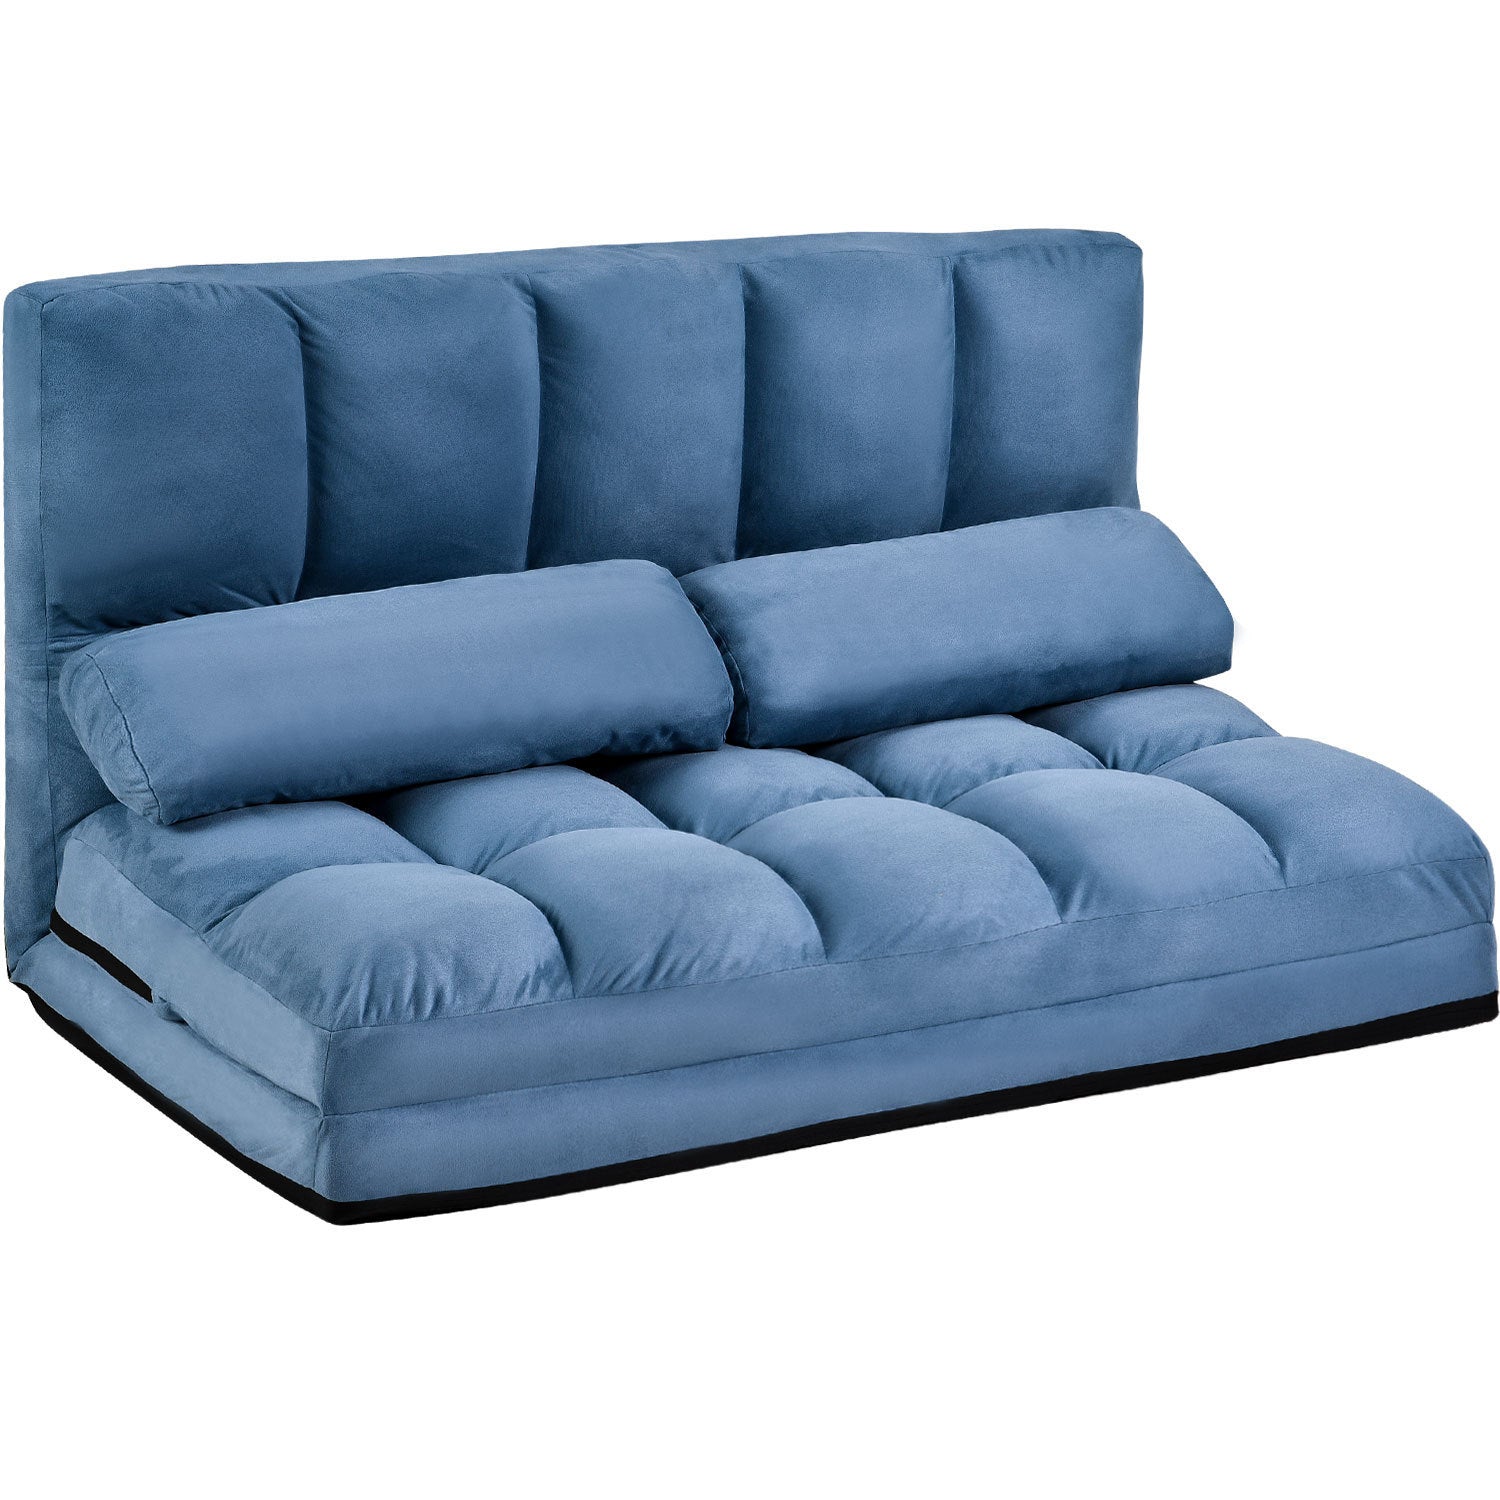 Double Chaise Lounge Sofa Floor and Living Room Sofa with Two Pillows (Blue)